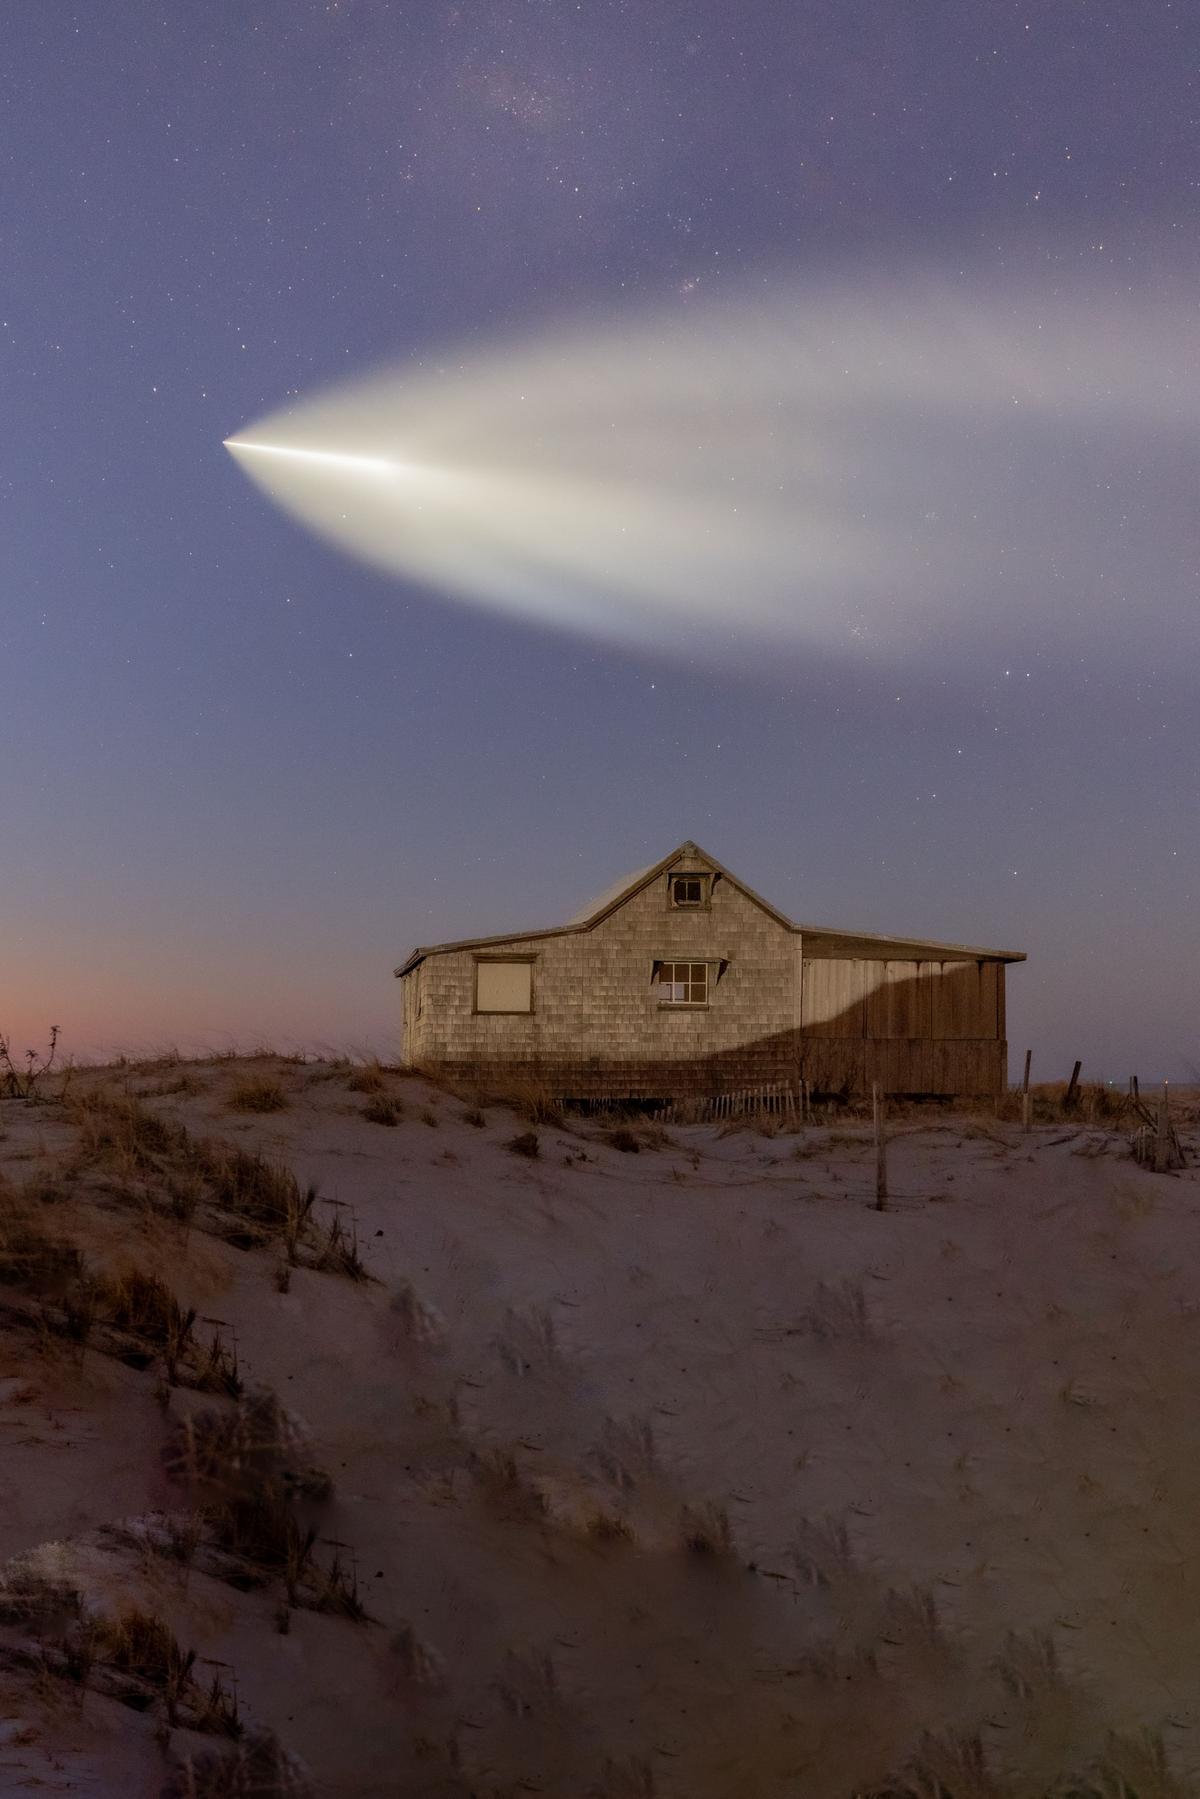 A shot of the what Mike Carroll believes to be the SpaceX Falcon 9 rocket over the Judge's Shack in New Jersey. (Kennedy News and Media)